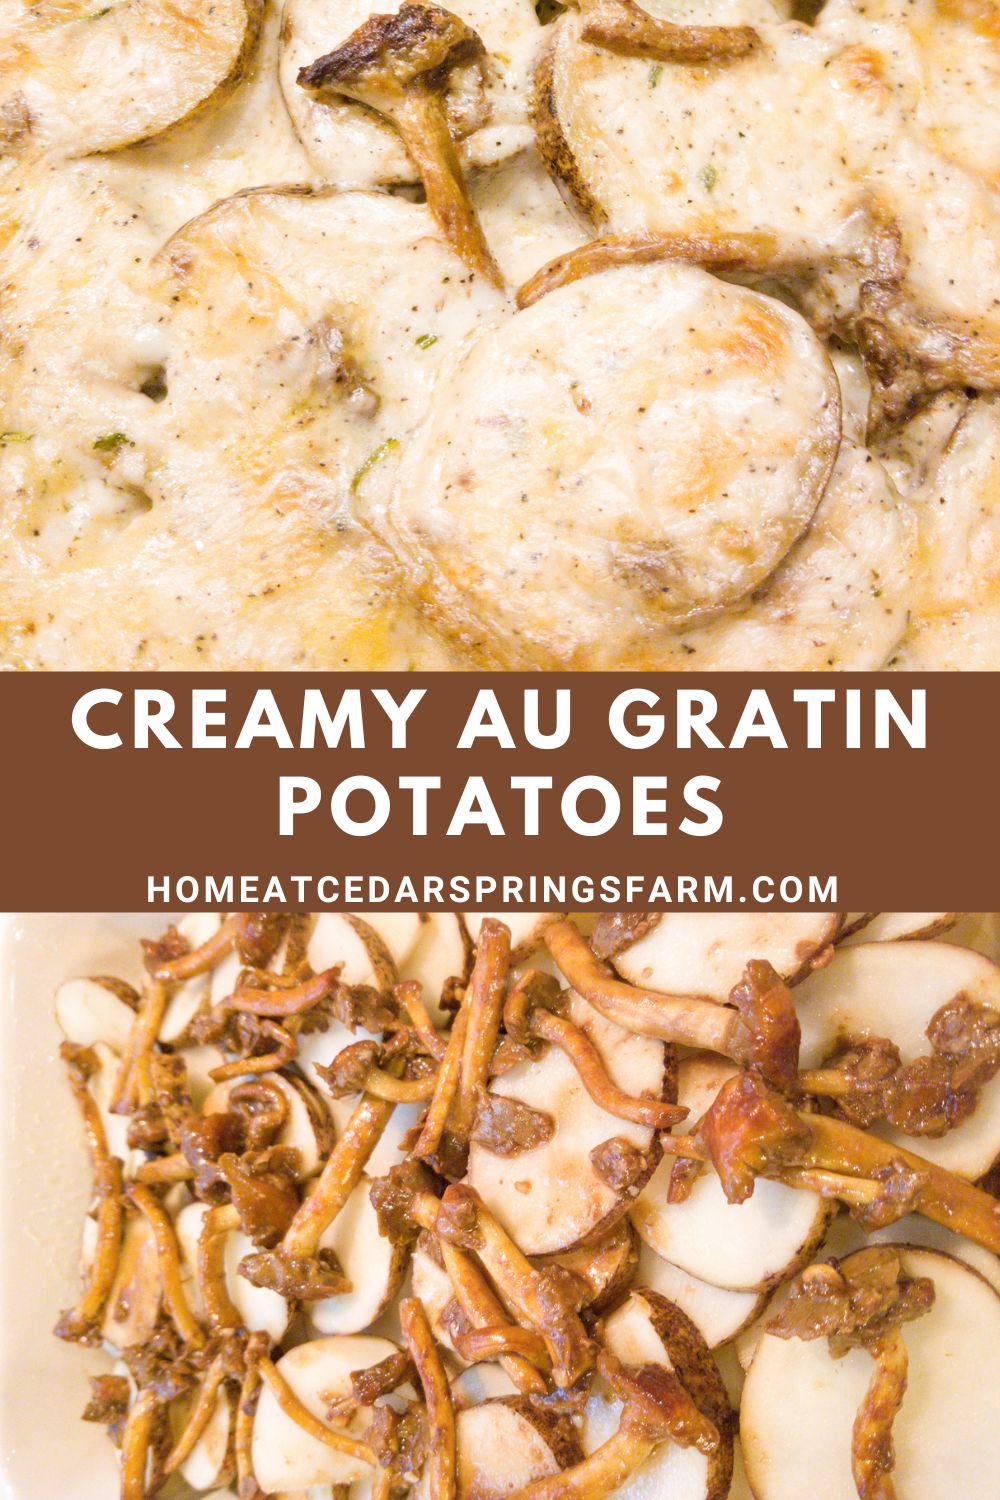 Creamy Au Gratin Potatoes picture with text overlay